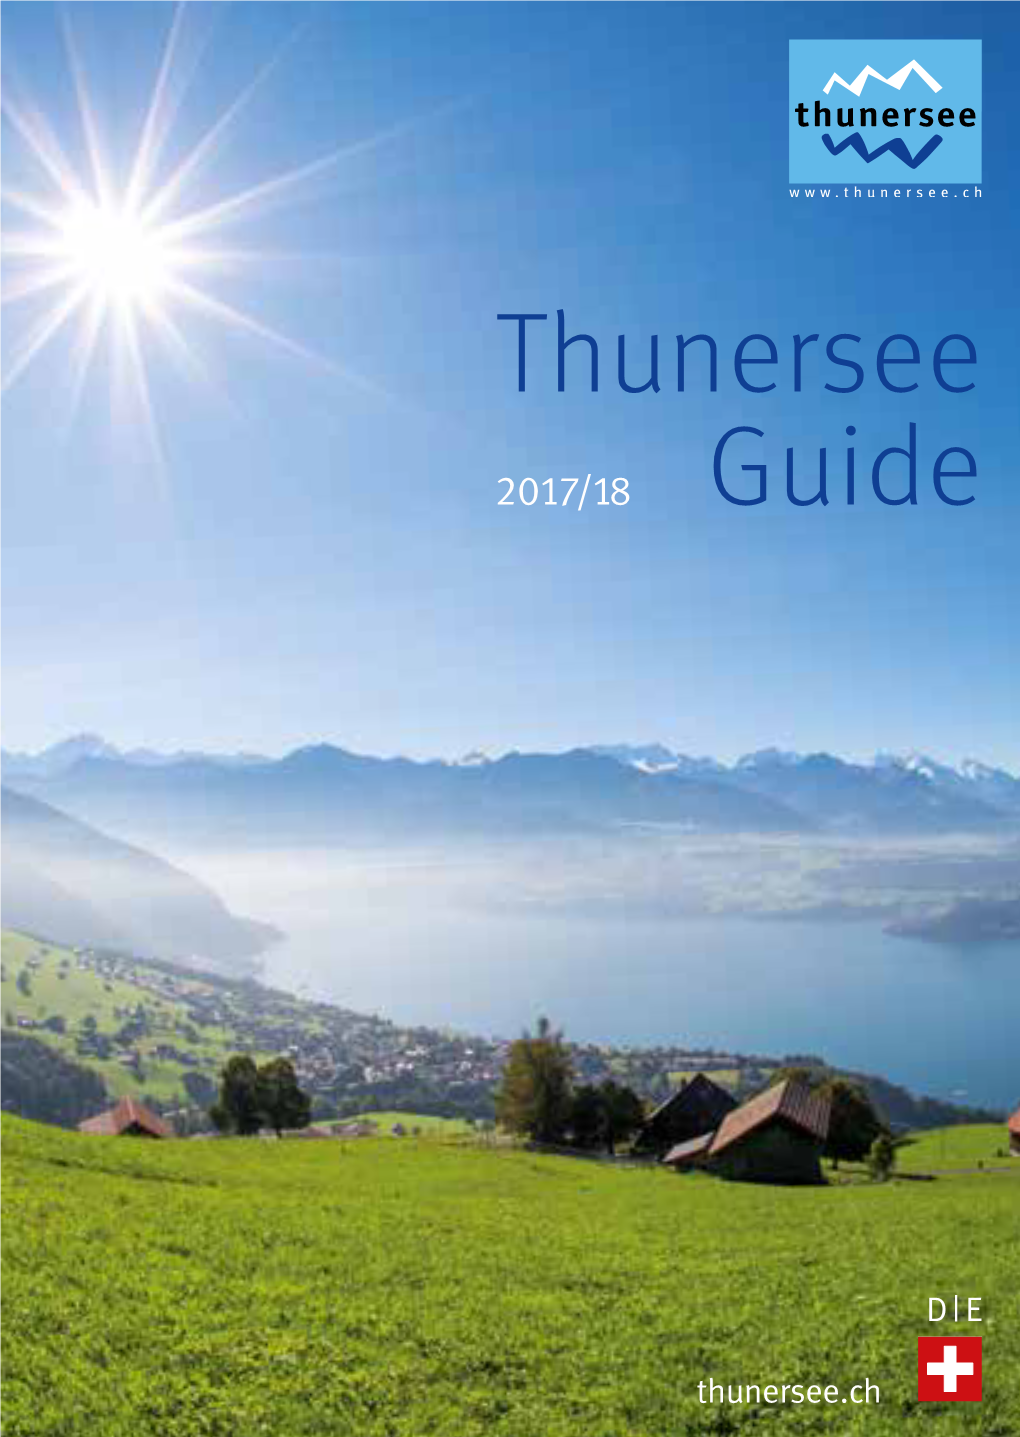 Thunersee Guide App 10 Überblick Thunersee / Overview Lake Thun